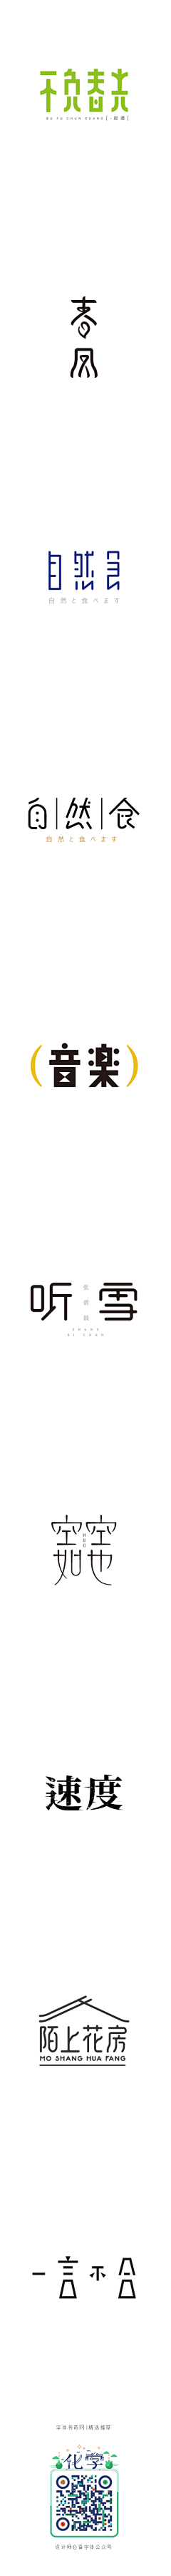 G_one采集到字体